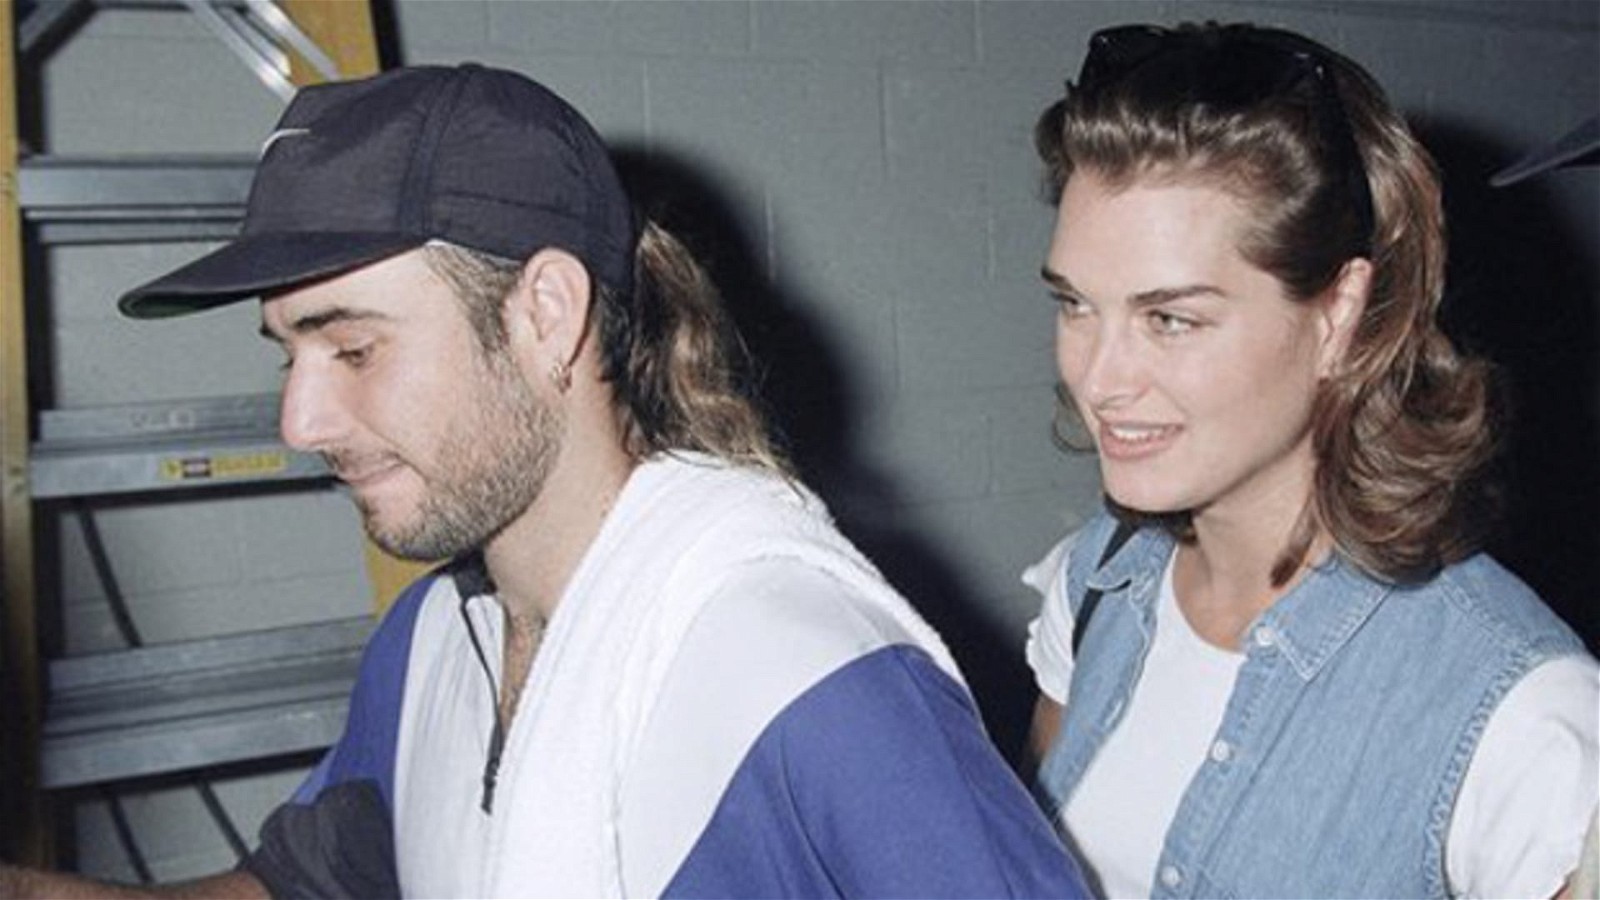 Andre Agassi and Brooke Shields